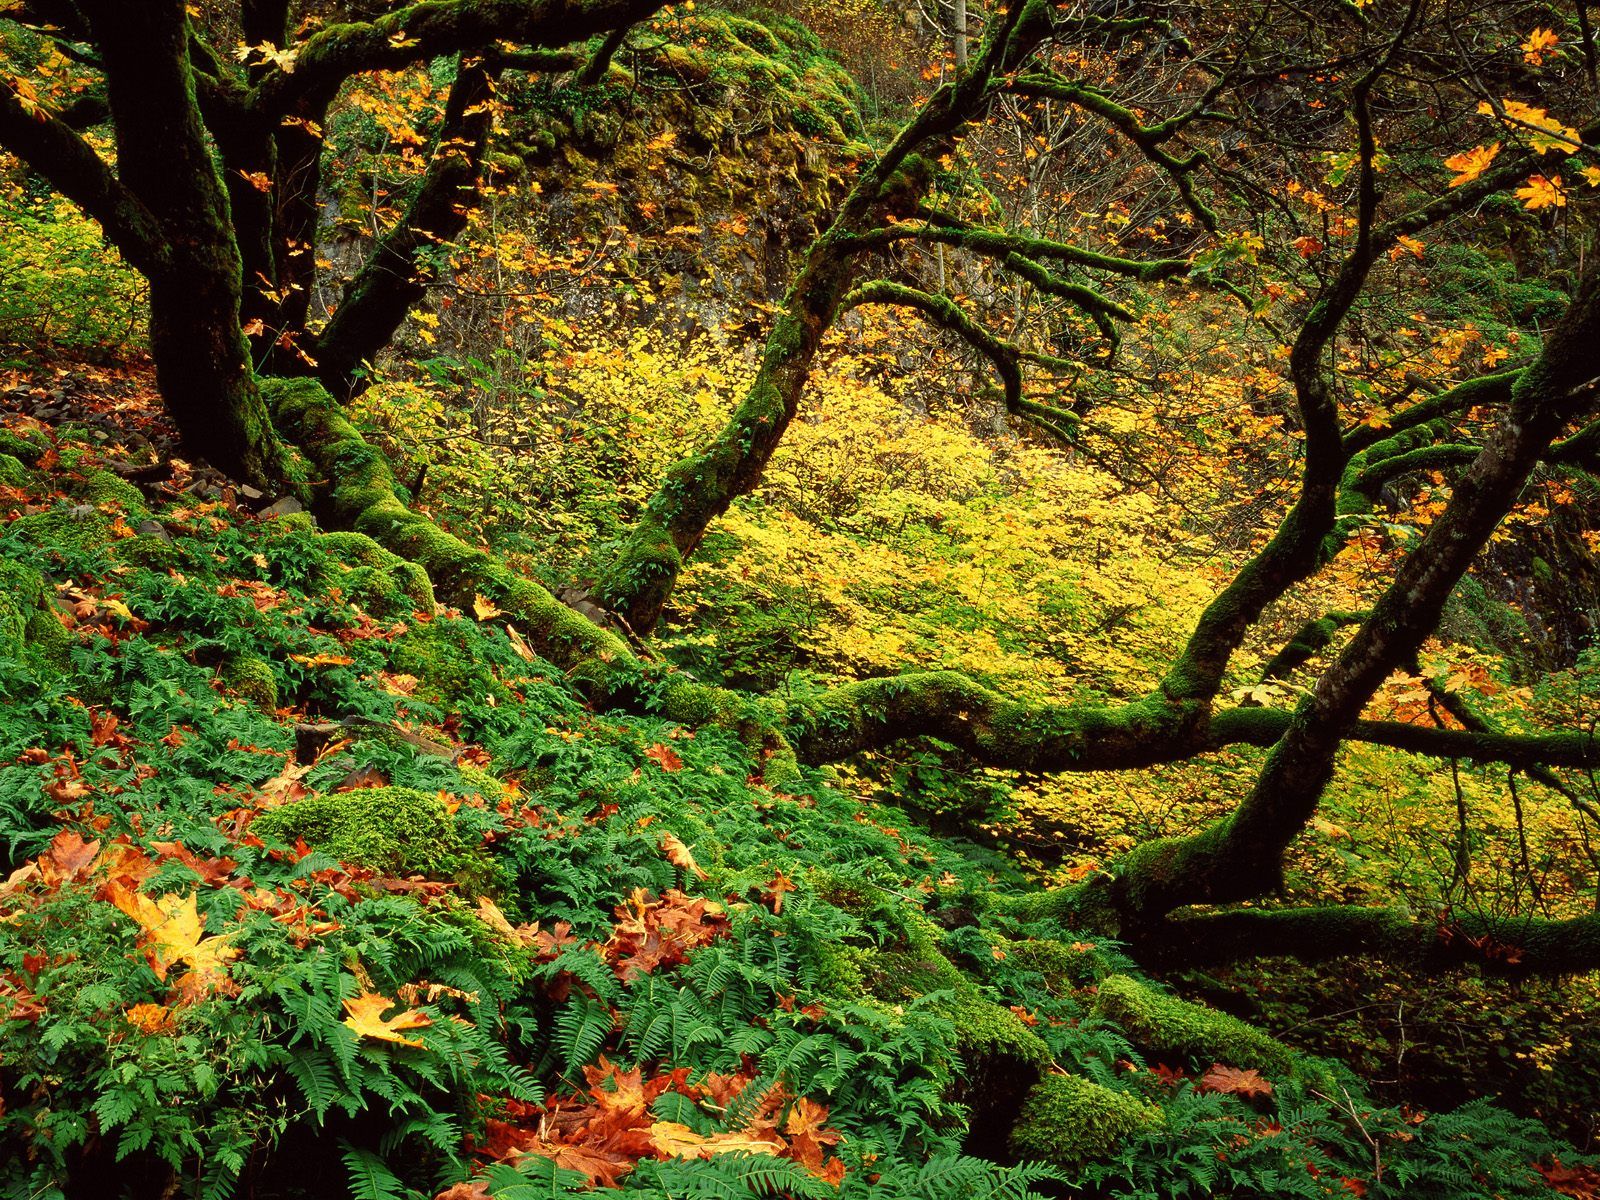 Big Leaf Maple And Ferns In Autumn, Columbia River Gorge, Oregon HD 1600x UXGA 1600x1200 Wallpaper Background Desktop, iphone & Android Free Download HD Wallpaper Background Desktop, iphone